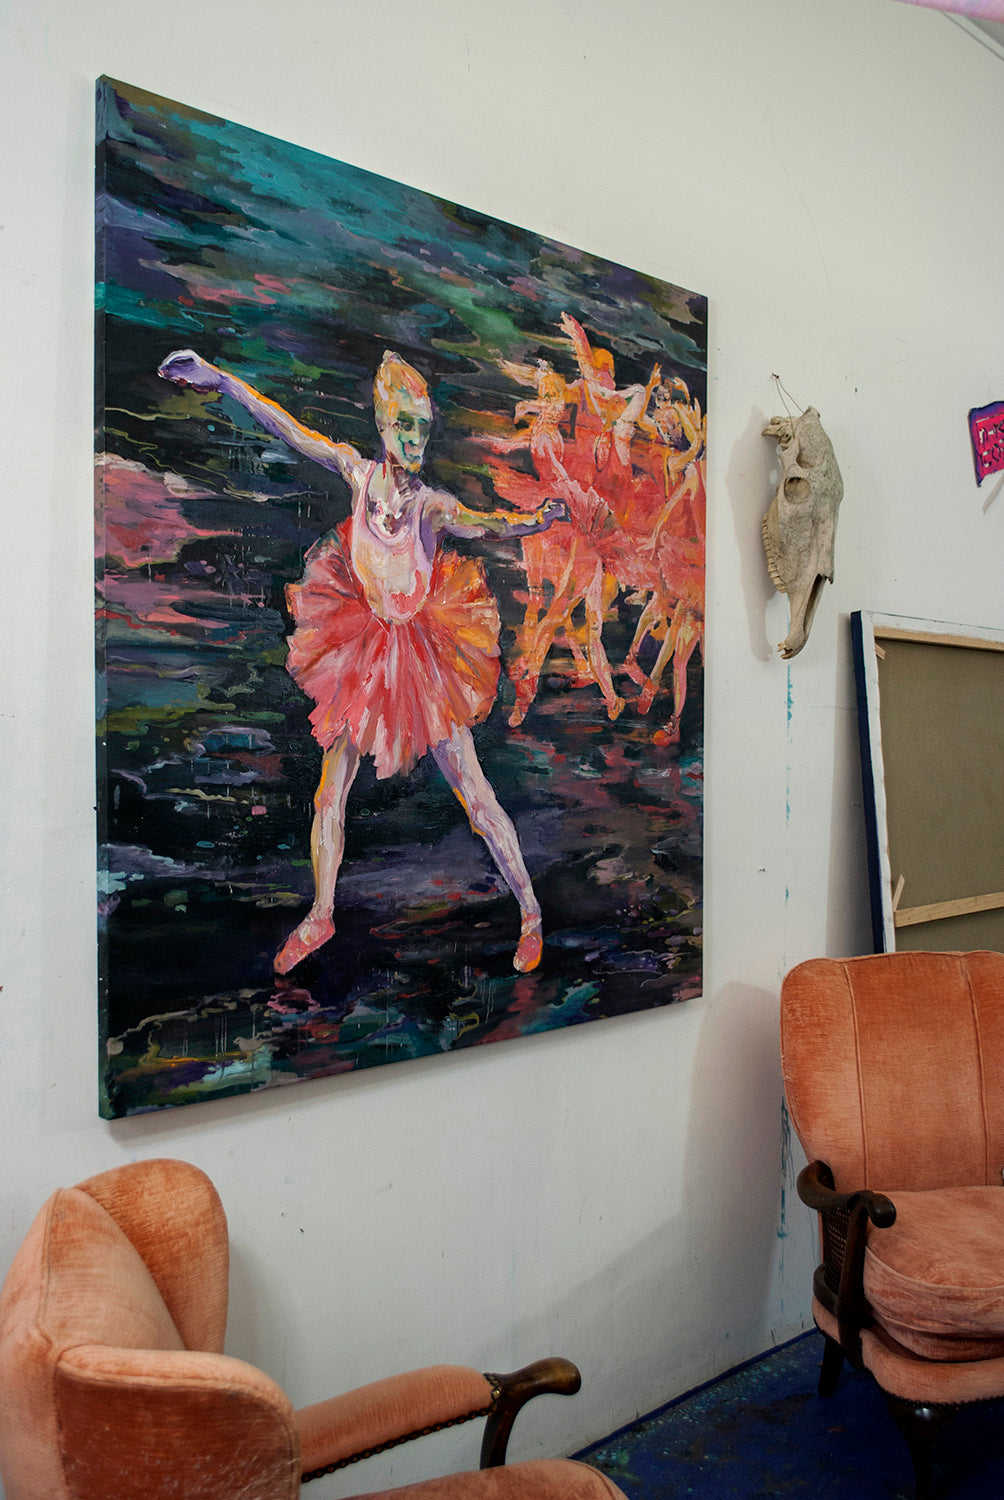 View in the studio of Dancers of Love, 150x150cm, oil on canvas, 2021 by Dominic Virtosu